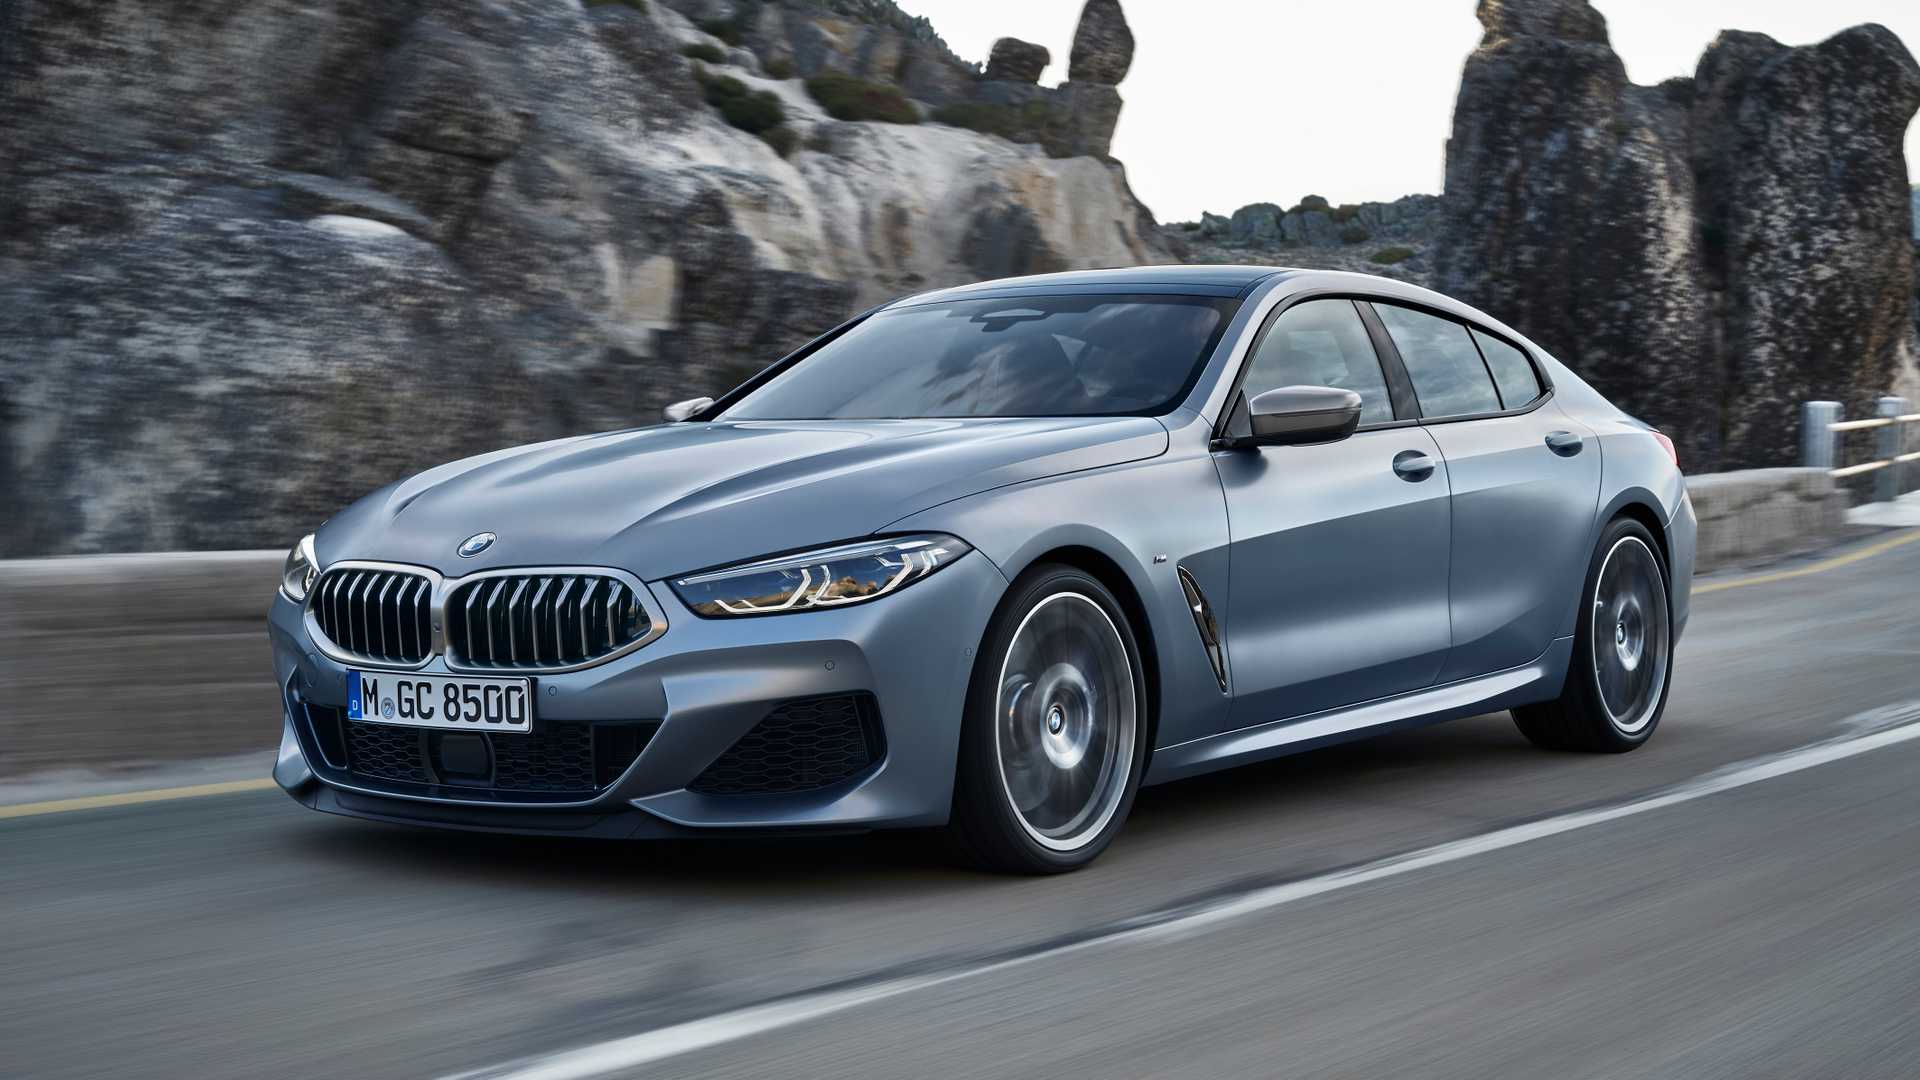 The 2020 BMW 8Series Gran Coupe debuts with four doors